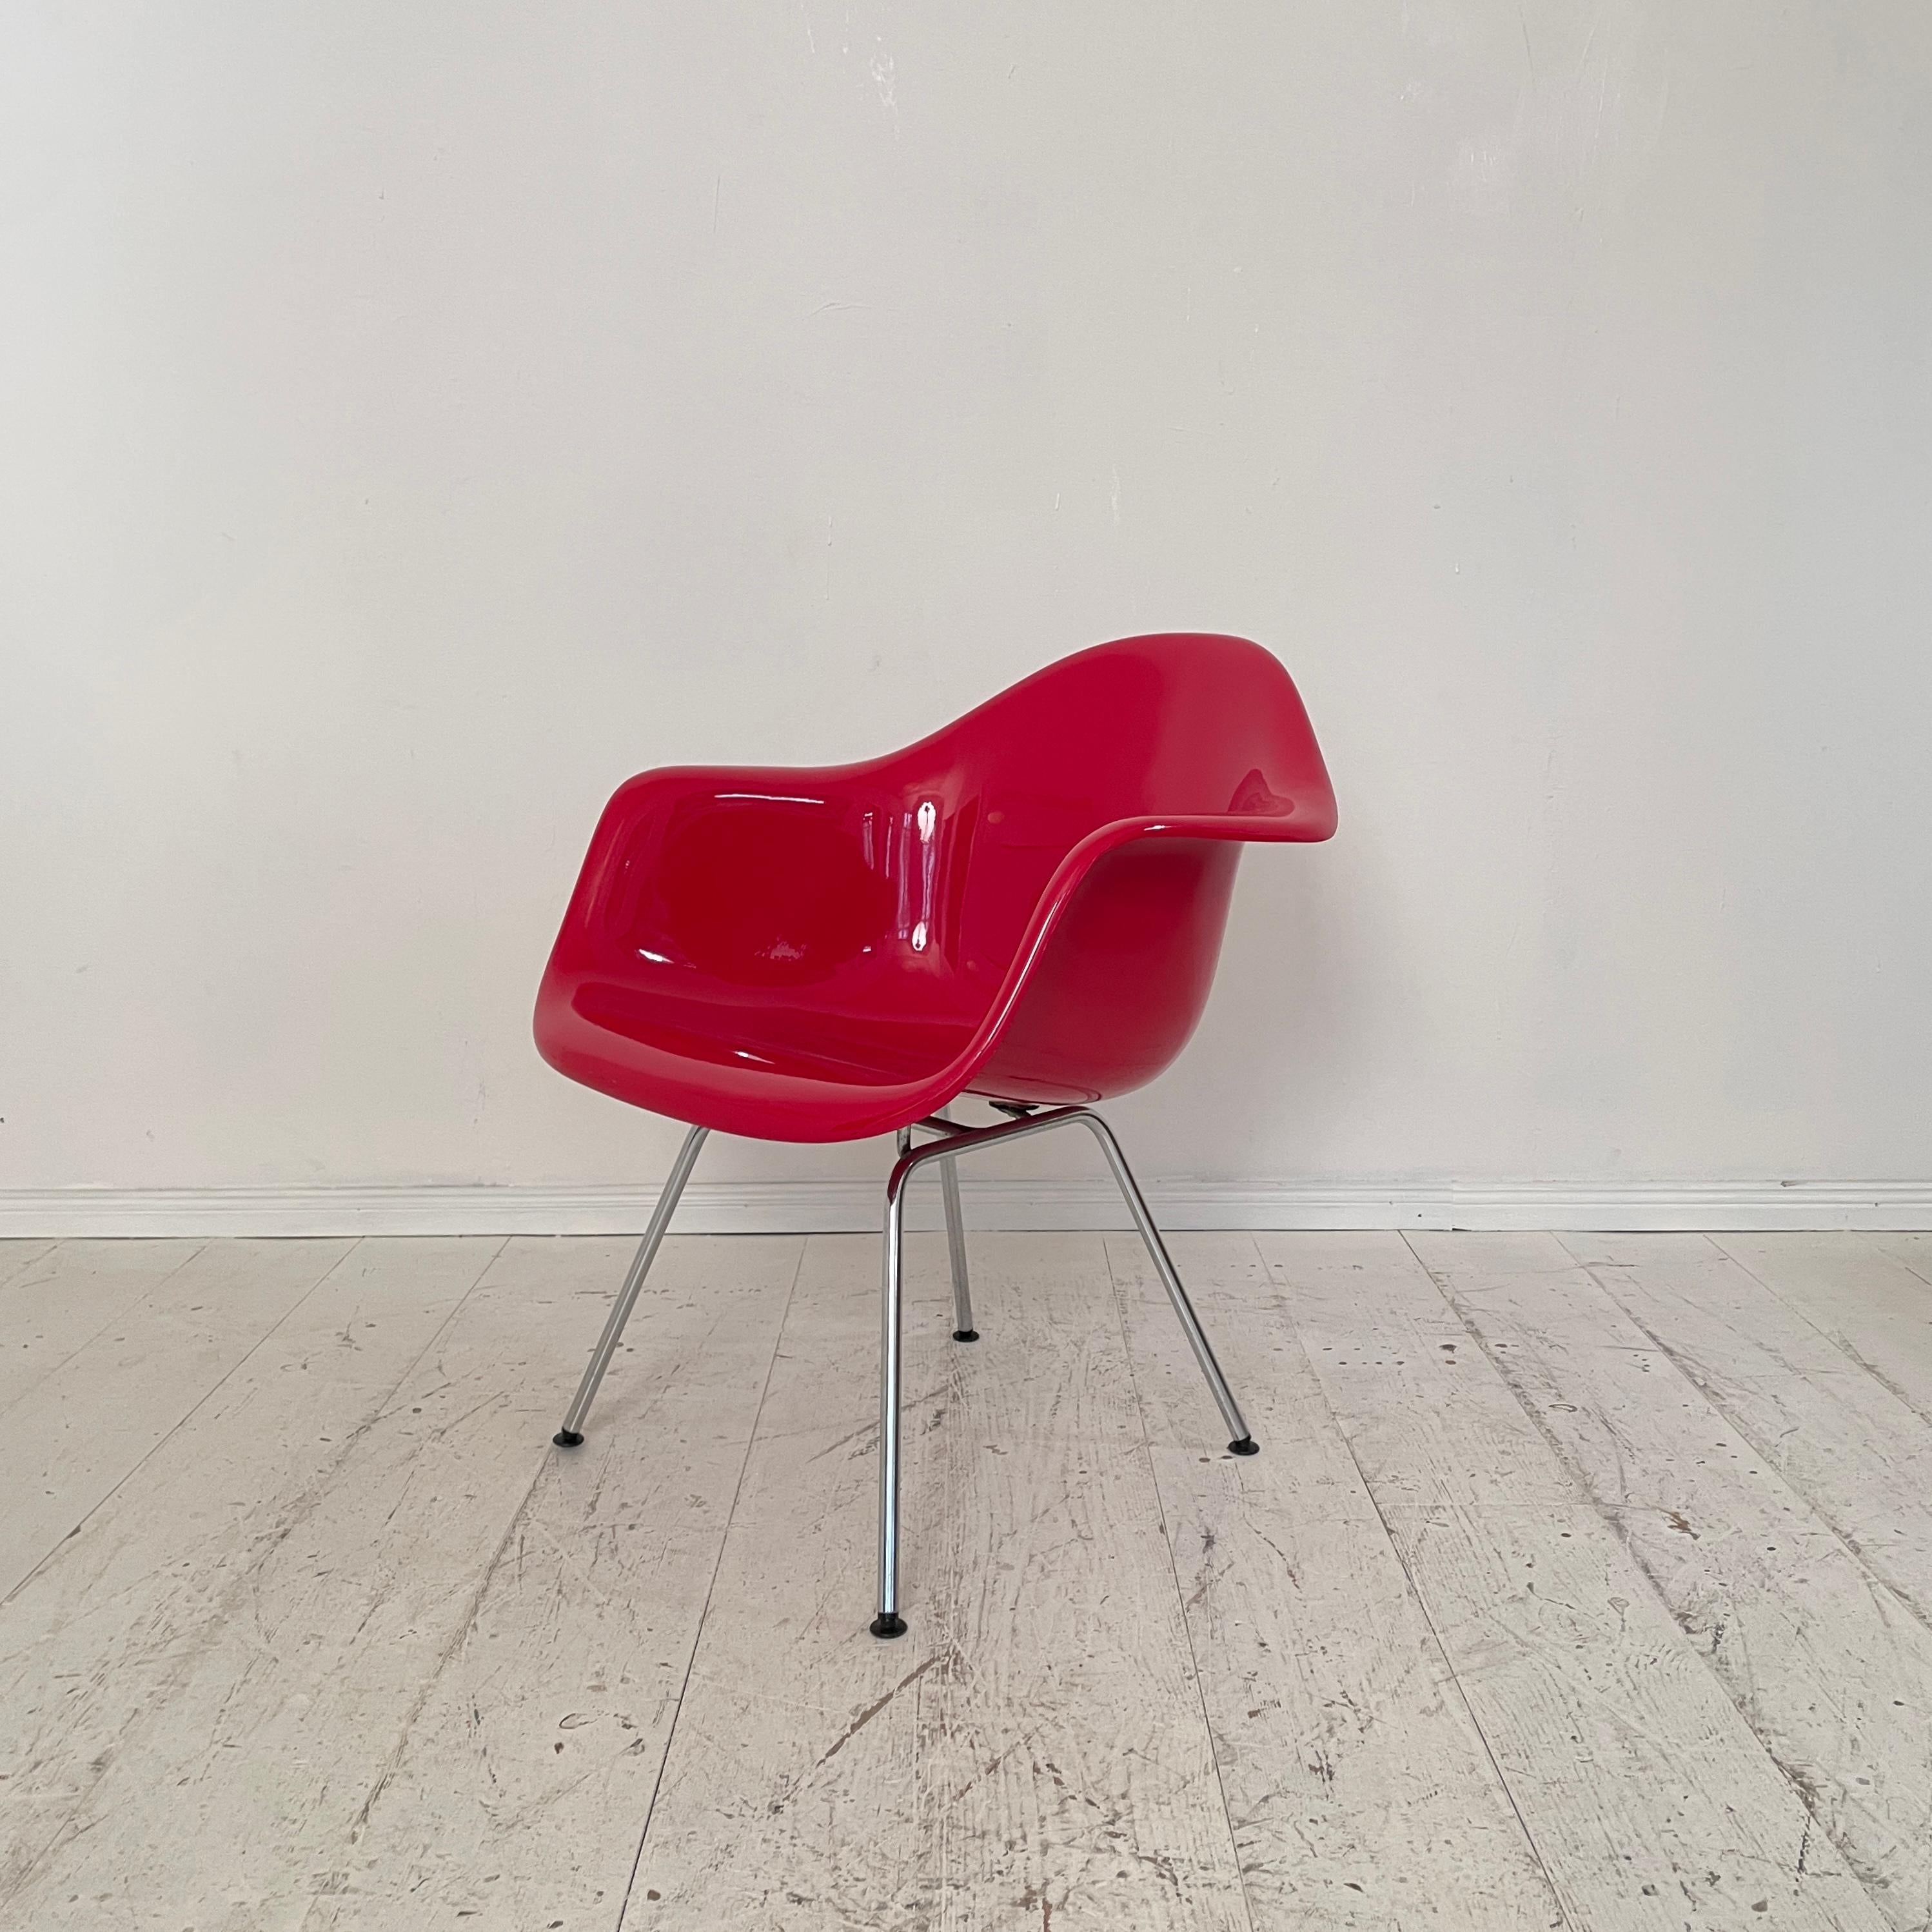 Swiss Red Dax Lounge Armchair by Charles & Ray Eames for Fehlbaum / Herman Miller 1966